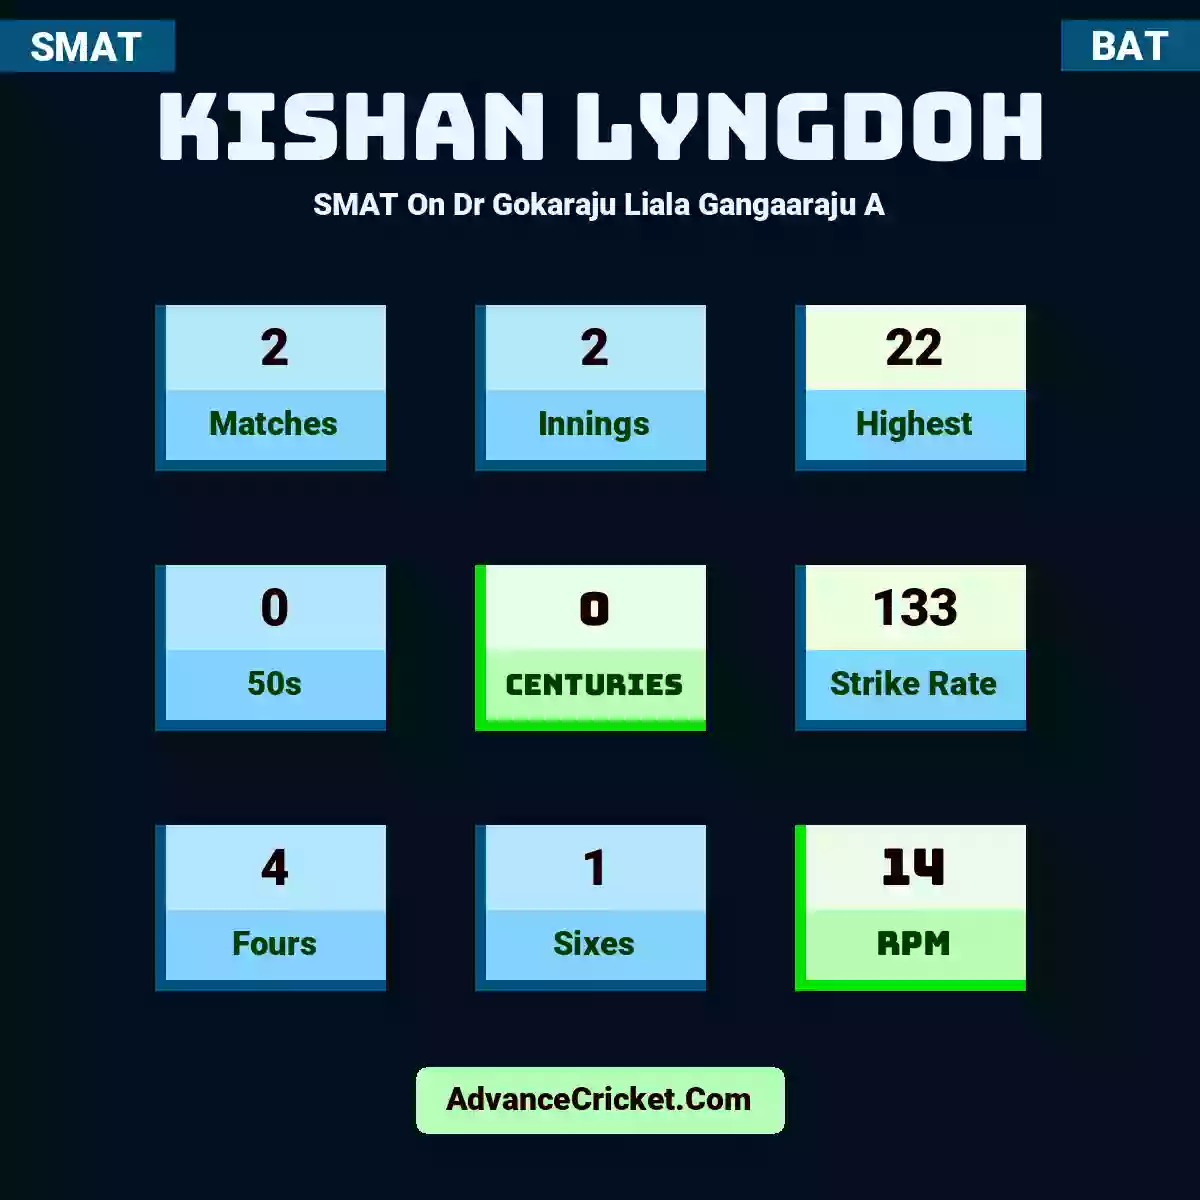 Kishan Lyngdoh SMAT  On Dr Gokaraju Liala Gangaaraju A, Kishan Lyngdoh played 2 matches, scored 22 runs as highest, 0 half-centuries, and 0 centuries, with a strike rate of 133. K.Lyngdoh hit 4 fours and 1 sixes, with an RPM of 14.